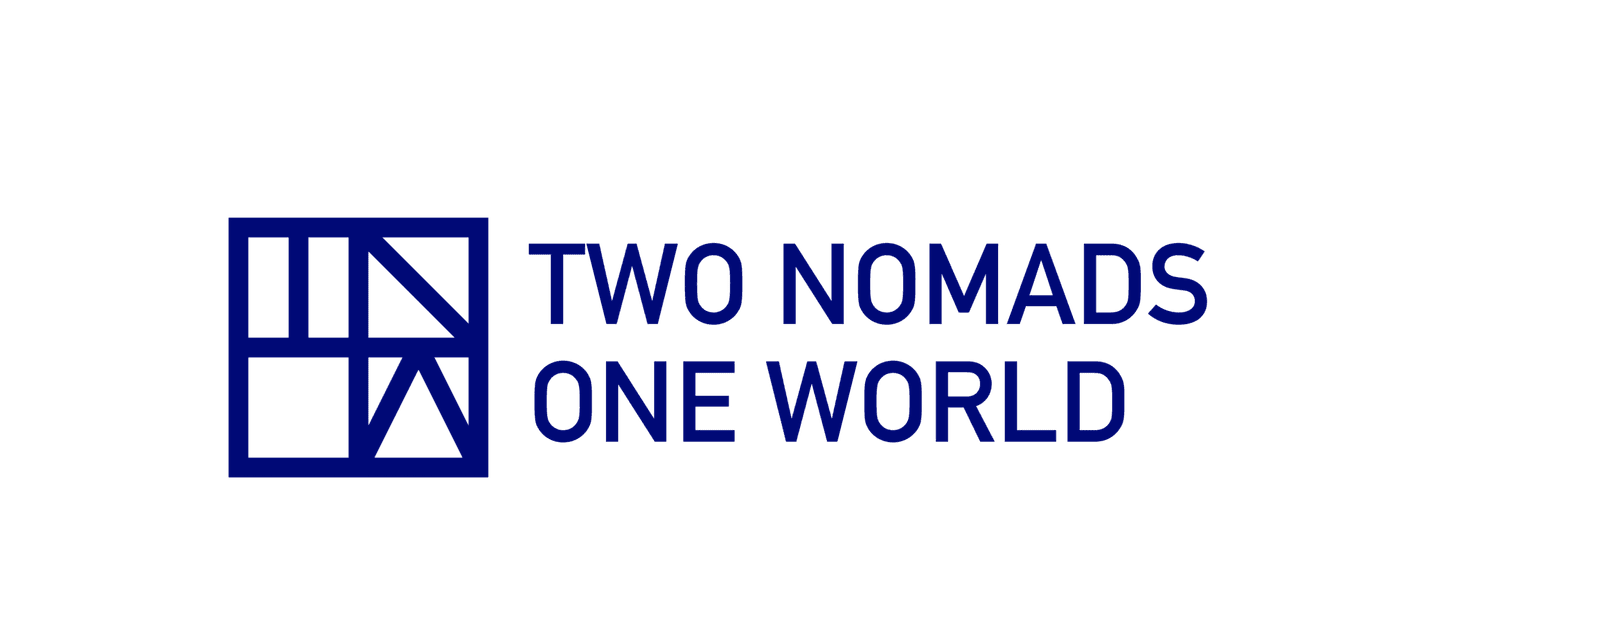 Two Nomads One World | Open-Ended Plane Tickets For Freedom | 2N1W